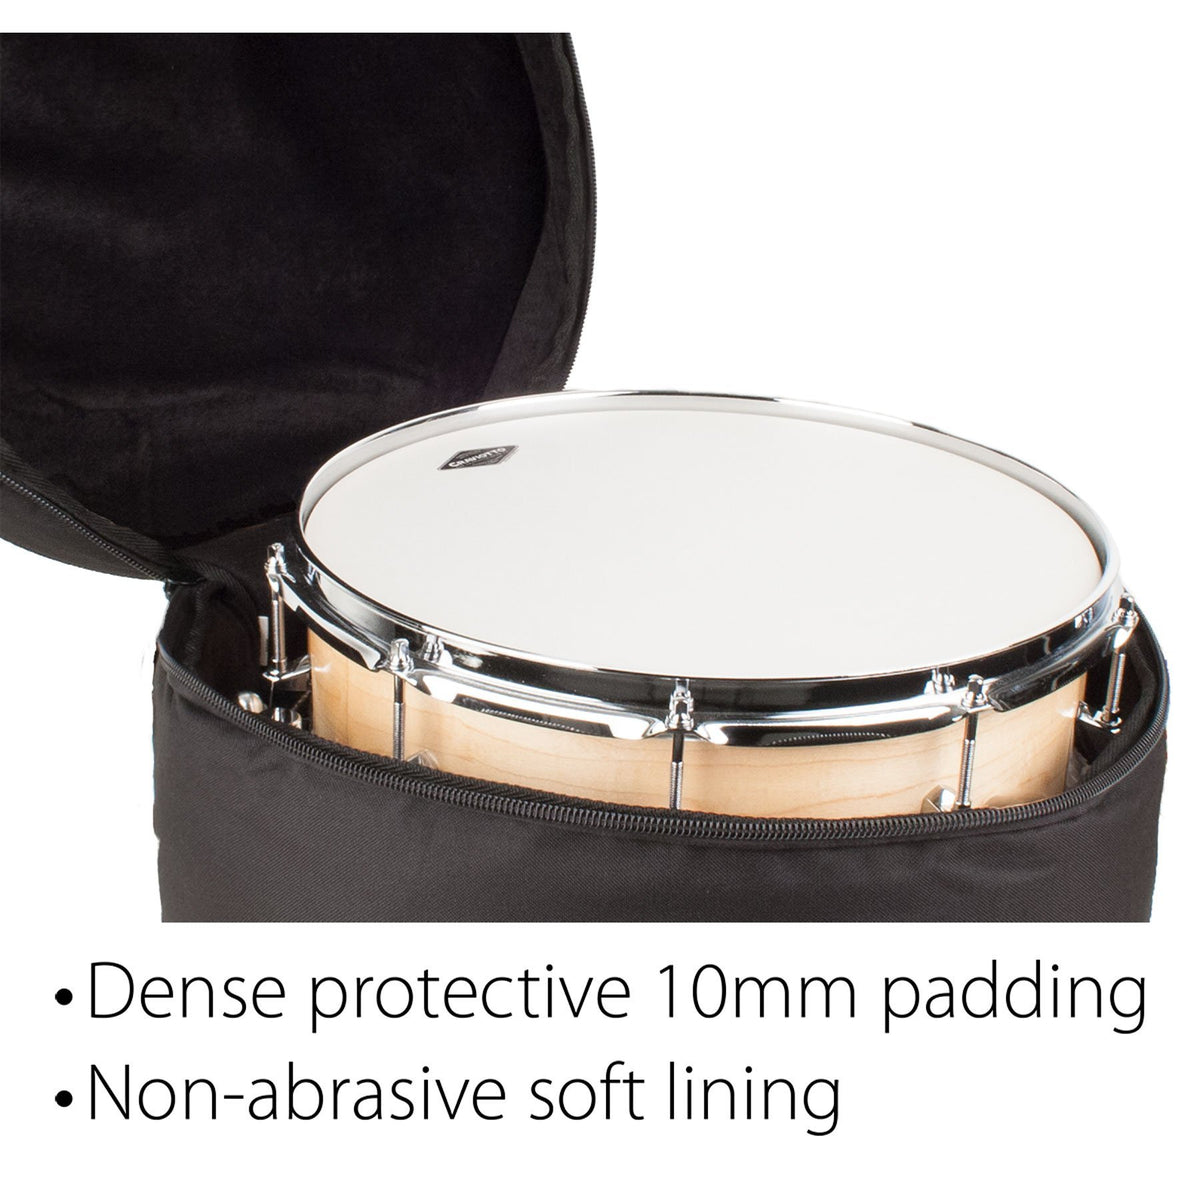 Protec - Padded Snare Bag 5.5â€³ X 14â€³ (Heavy Ready Series)-Percussion-Protec-Music Elements